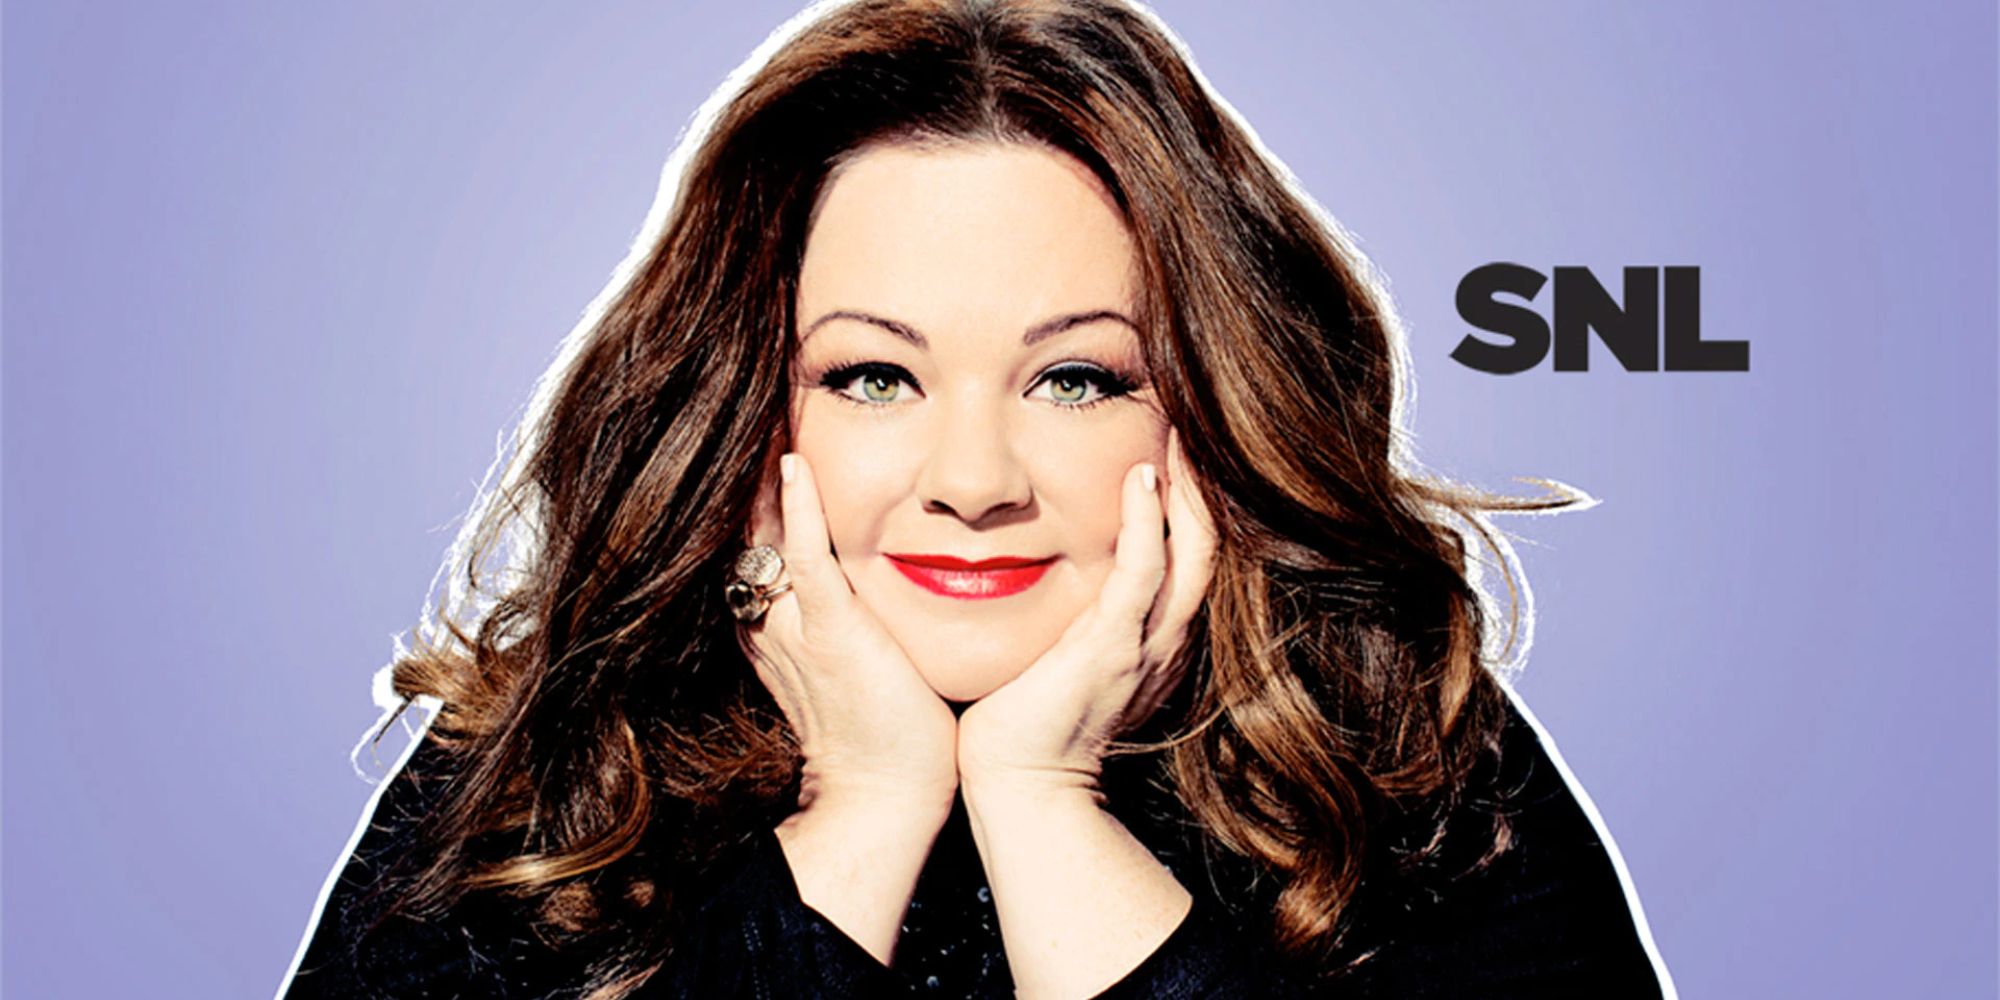 Melissa McCarthy in an SNL title card in 2017